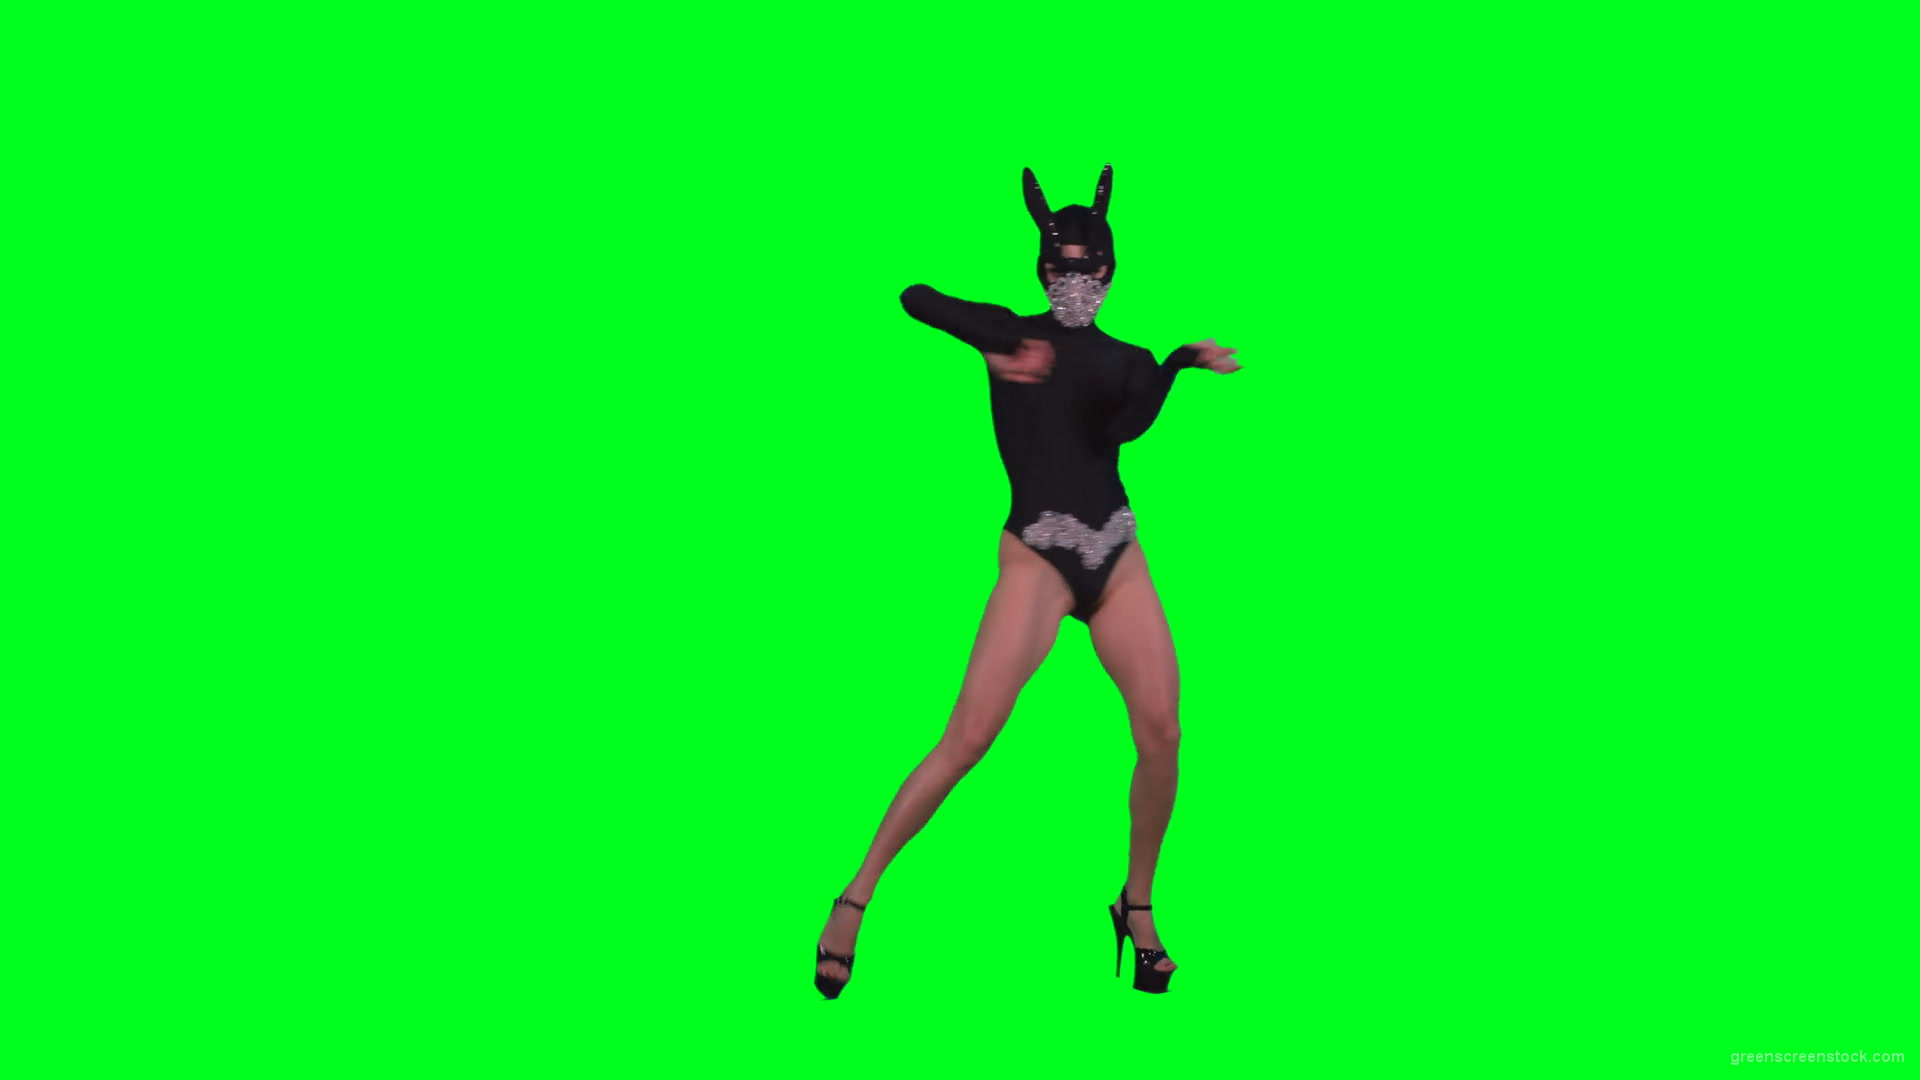 Amazing-black-banny-rabbit-girl-dancing-go-go-isolated-on-green-screen-RAVE-Video-Footage-1920_005 Green Screen Stock